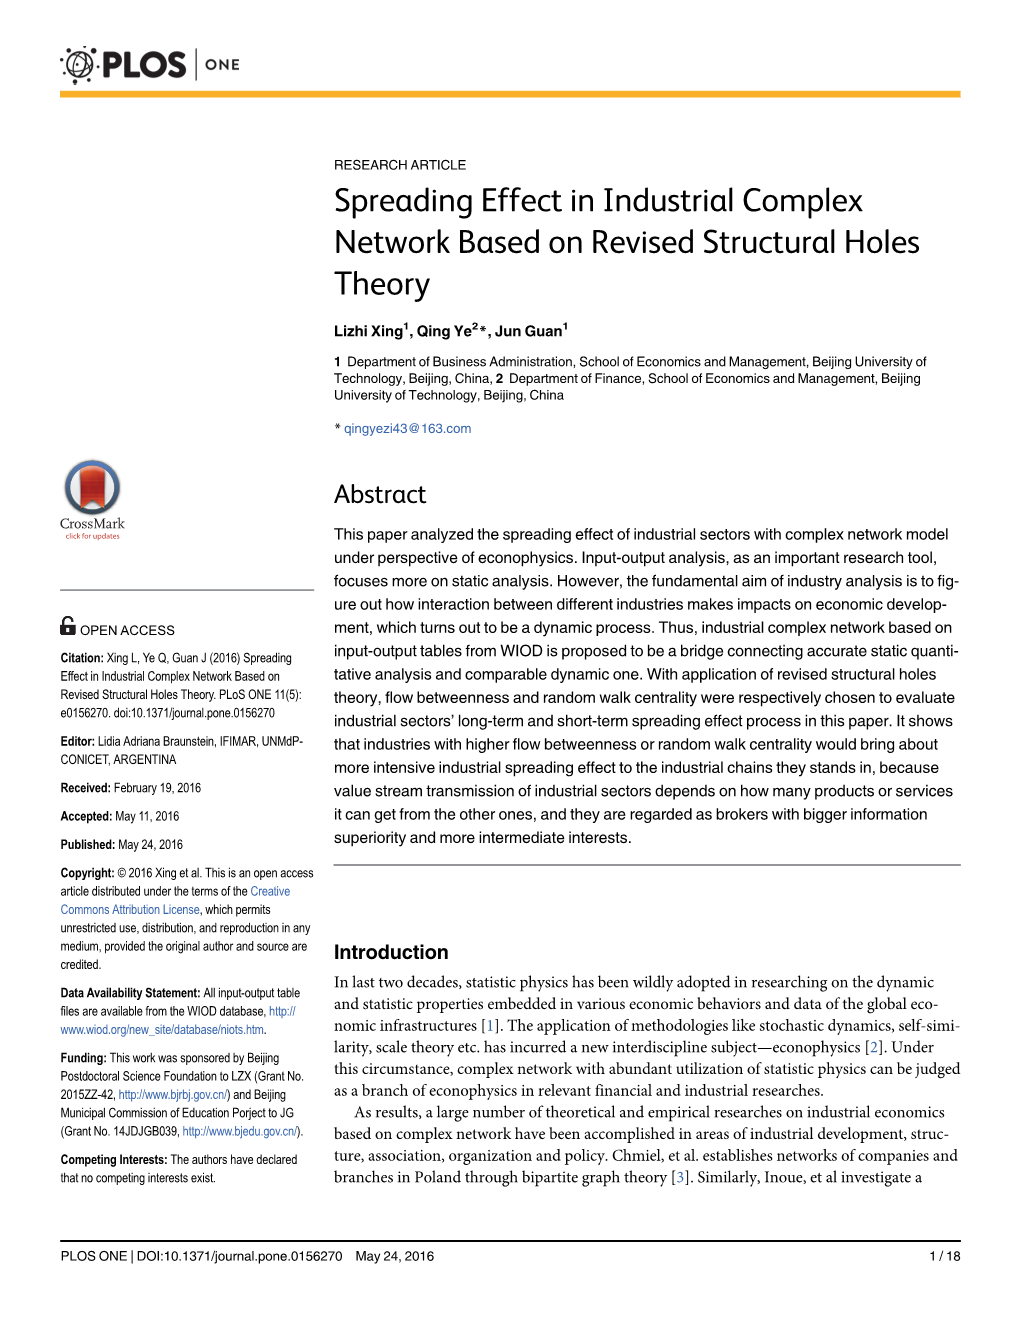 Spreading Effect in Industrial Complex Network Based on Revised Structural Holes Theory